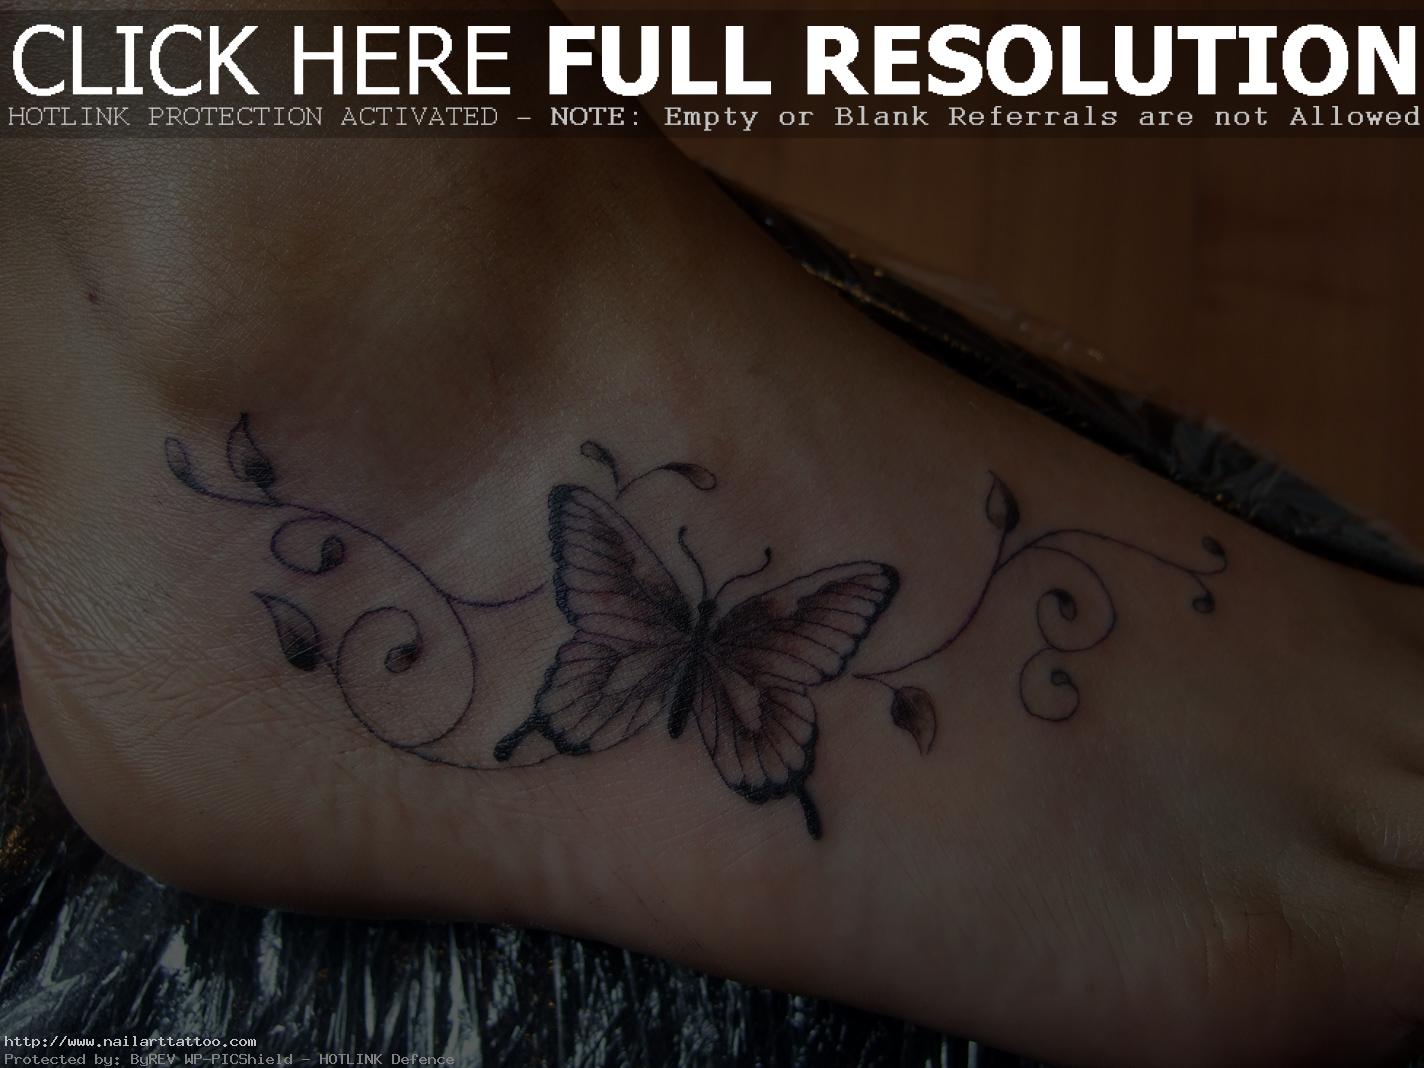 Butterfly Tattoos Designs on Foot